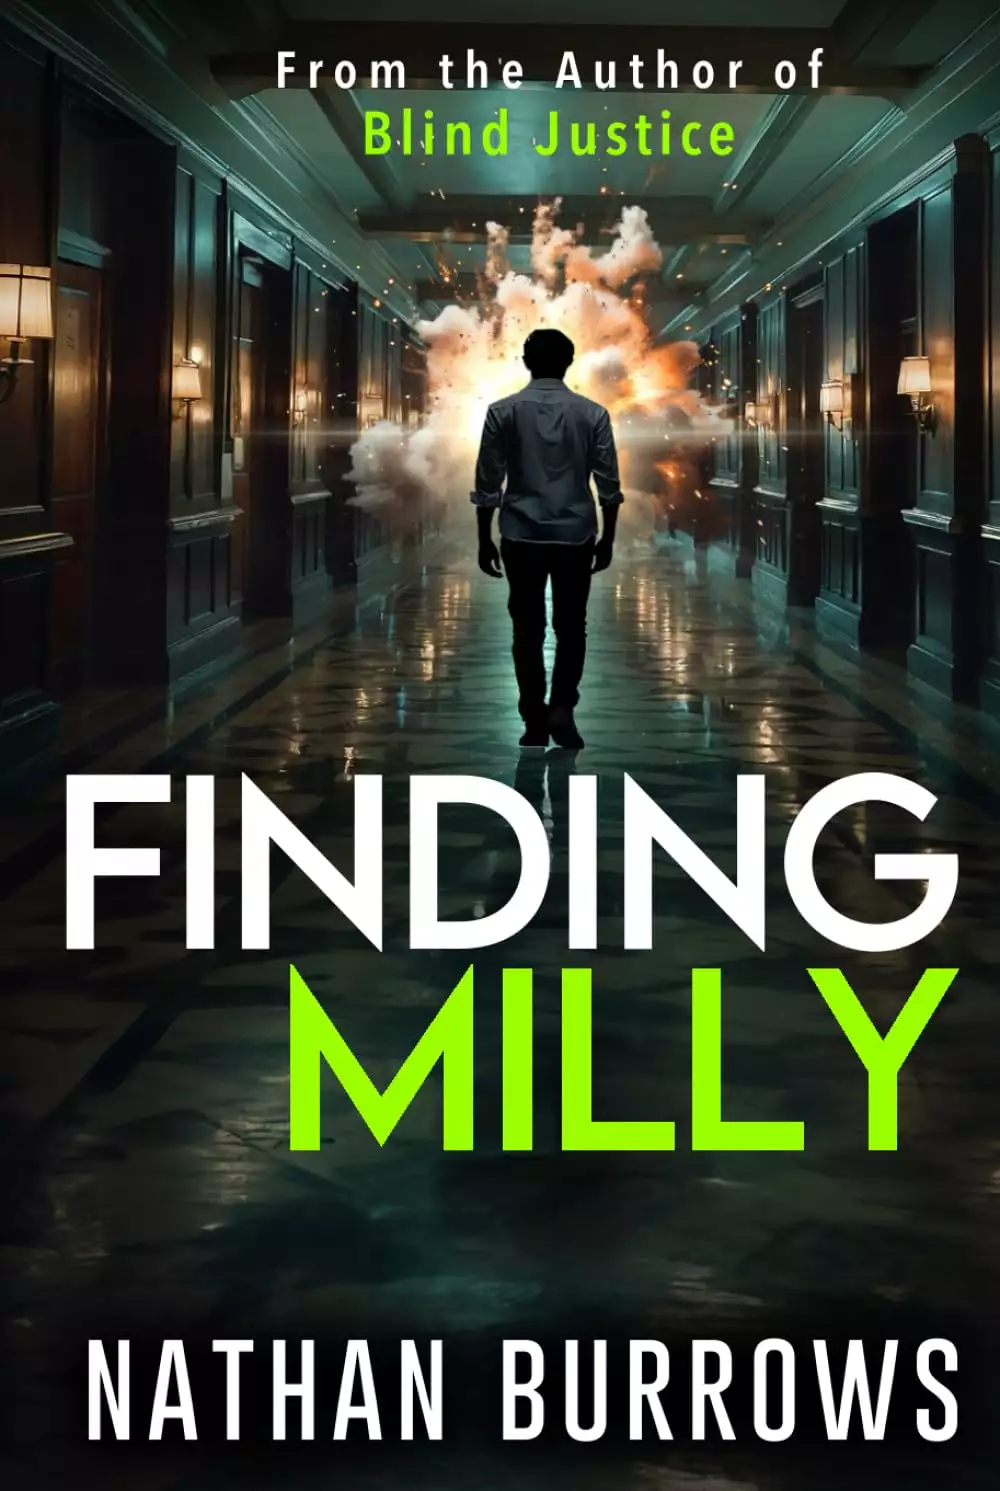 Finding Milly